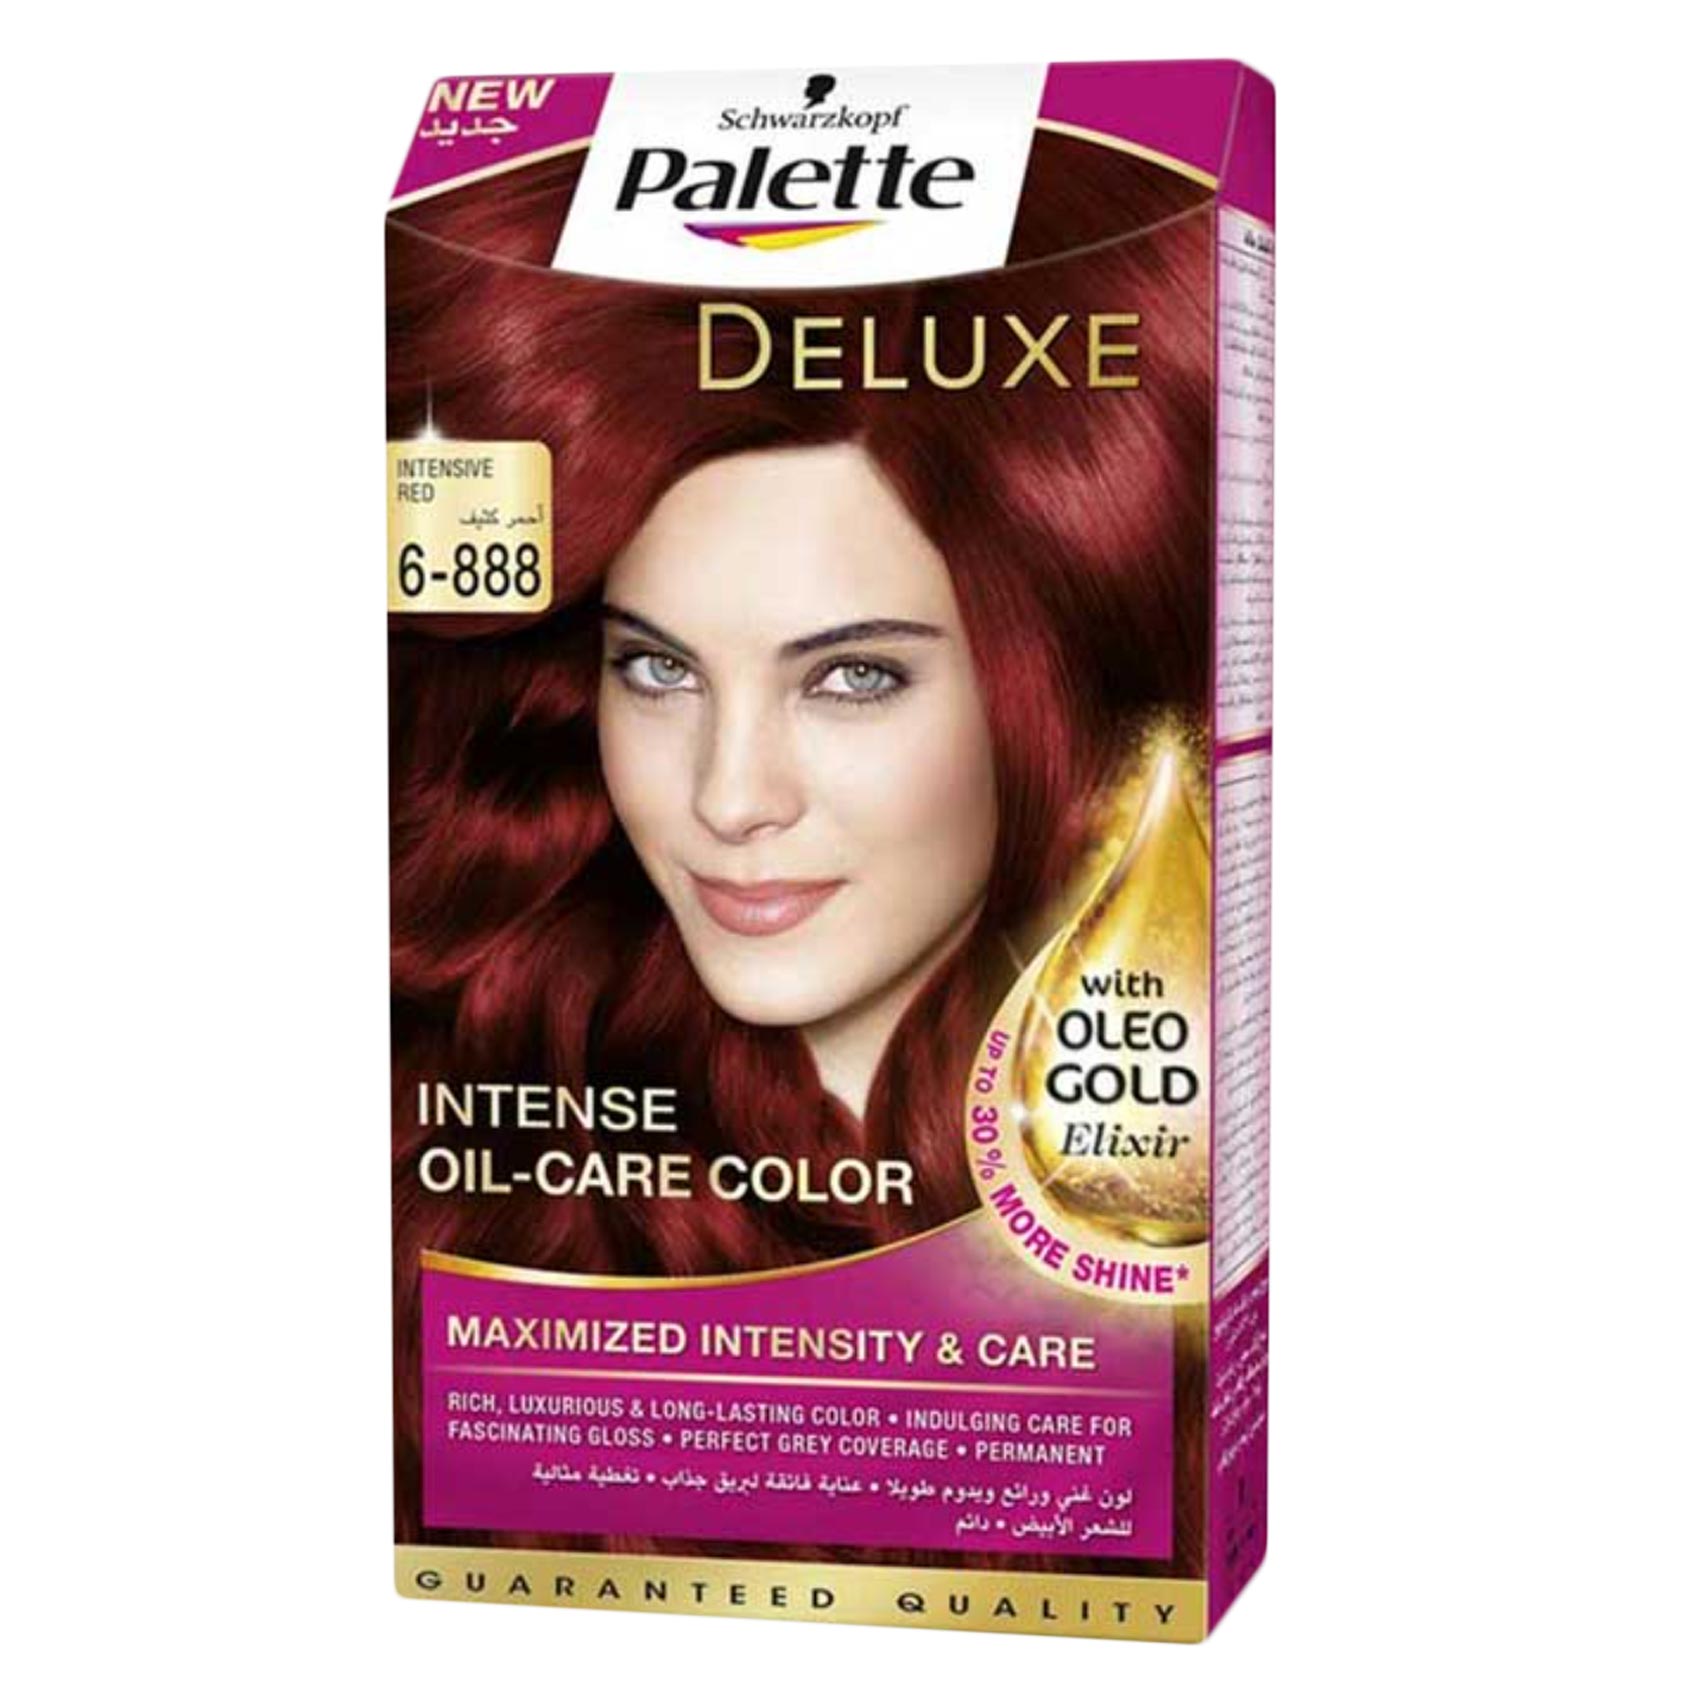 Schwarzkopf Palette Deluxe Intense Oil Care Hair Color 6-888 Intensive Red 50ml